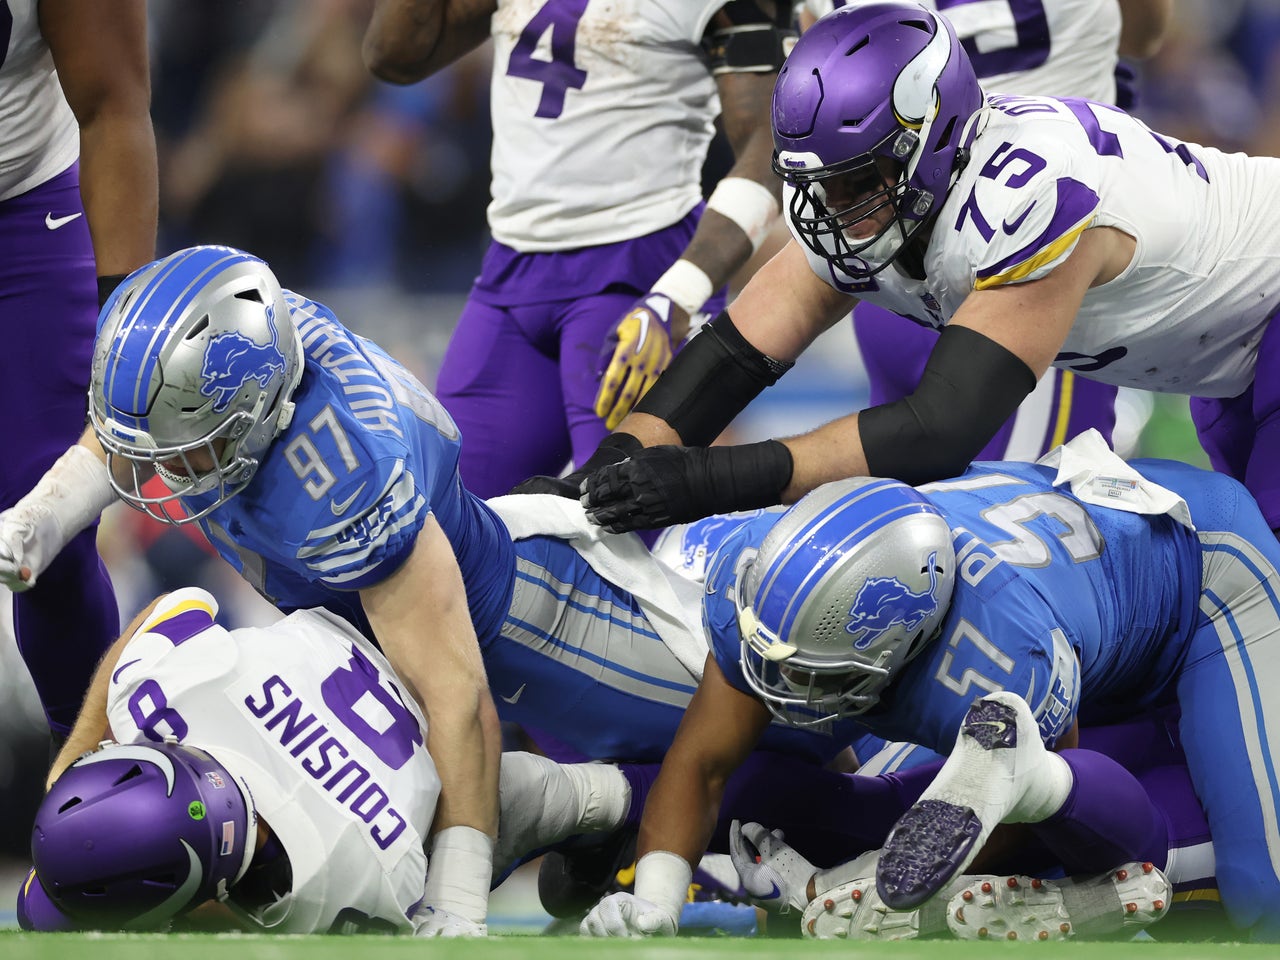 Vikings Vs. Saints: Why Neither Team Will Make It To NFC Championship, News, Scores, Highlights, Stats, and Rumors